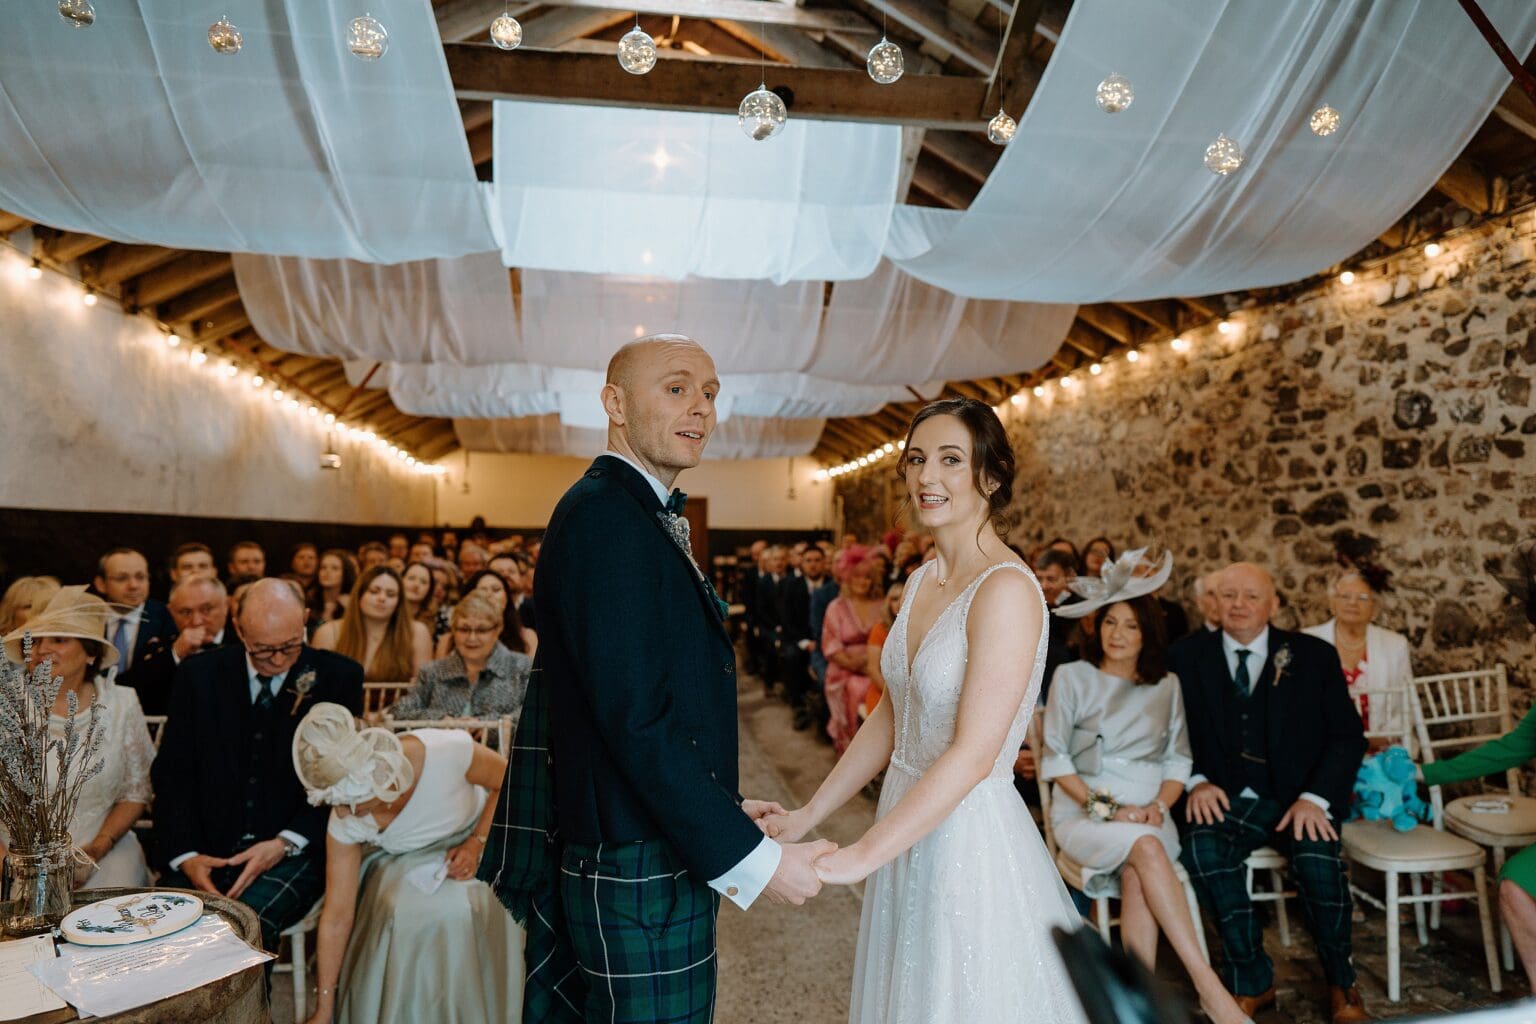 seating guests look on as the bride and groom hold hands beneath decorative white drapes during their wedding ceremony at one of the most unusual farm wedding venues in scotland